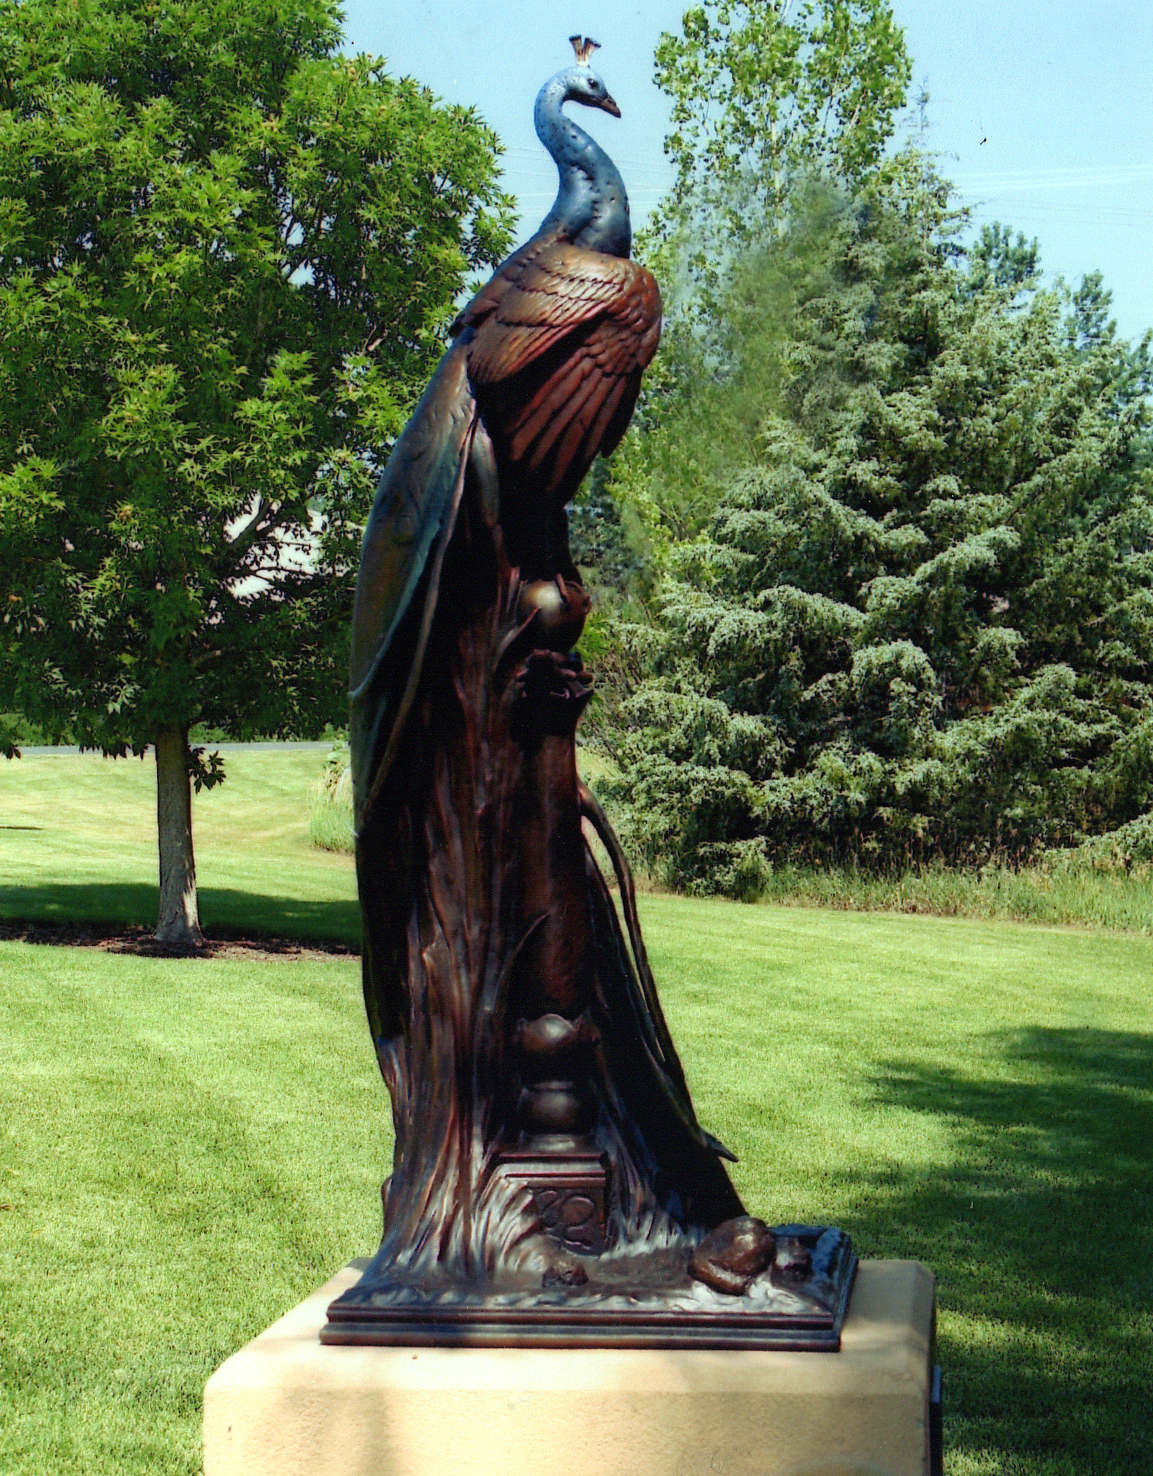 Peacock Guardian of Paradise
by George McMonigle, NSS